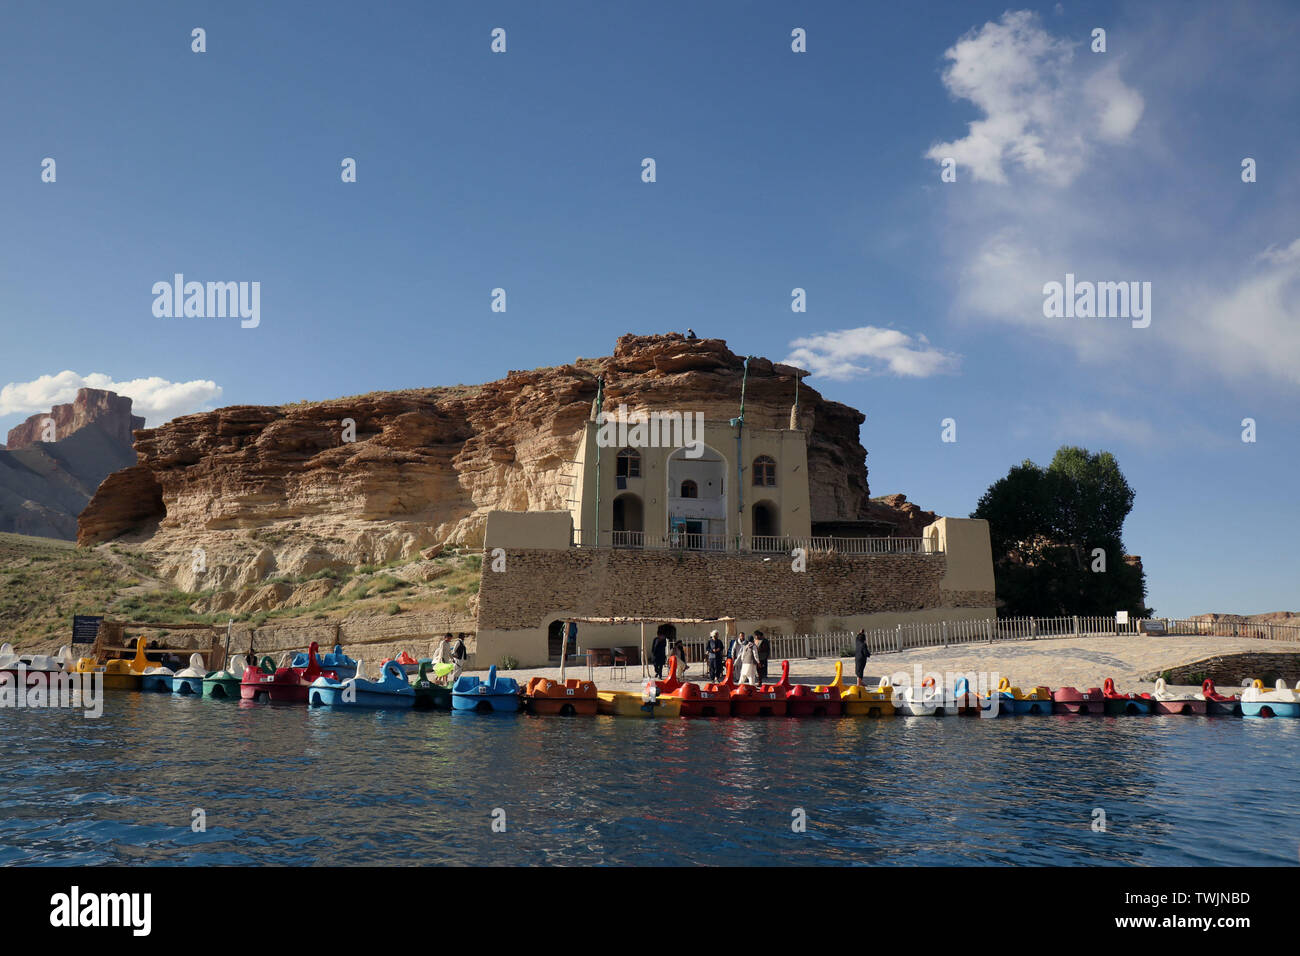 Bamyan. 19th June, 2019. Photo taken on June 19, 2019 shows the Band-e-Amir lake in Bamyan province, central Afghanistan. Credit: Noor Azizi/Xinhua/Alamy Live News Stock Photo